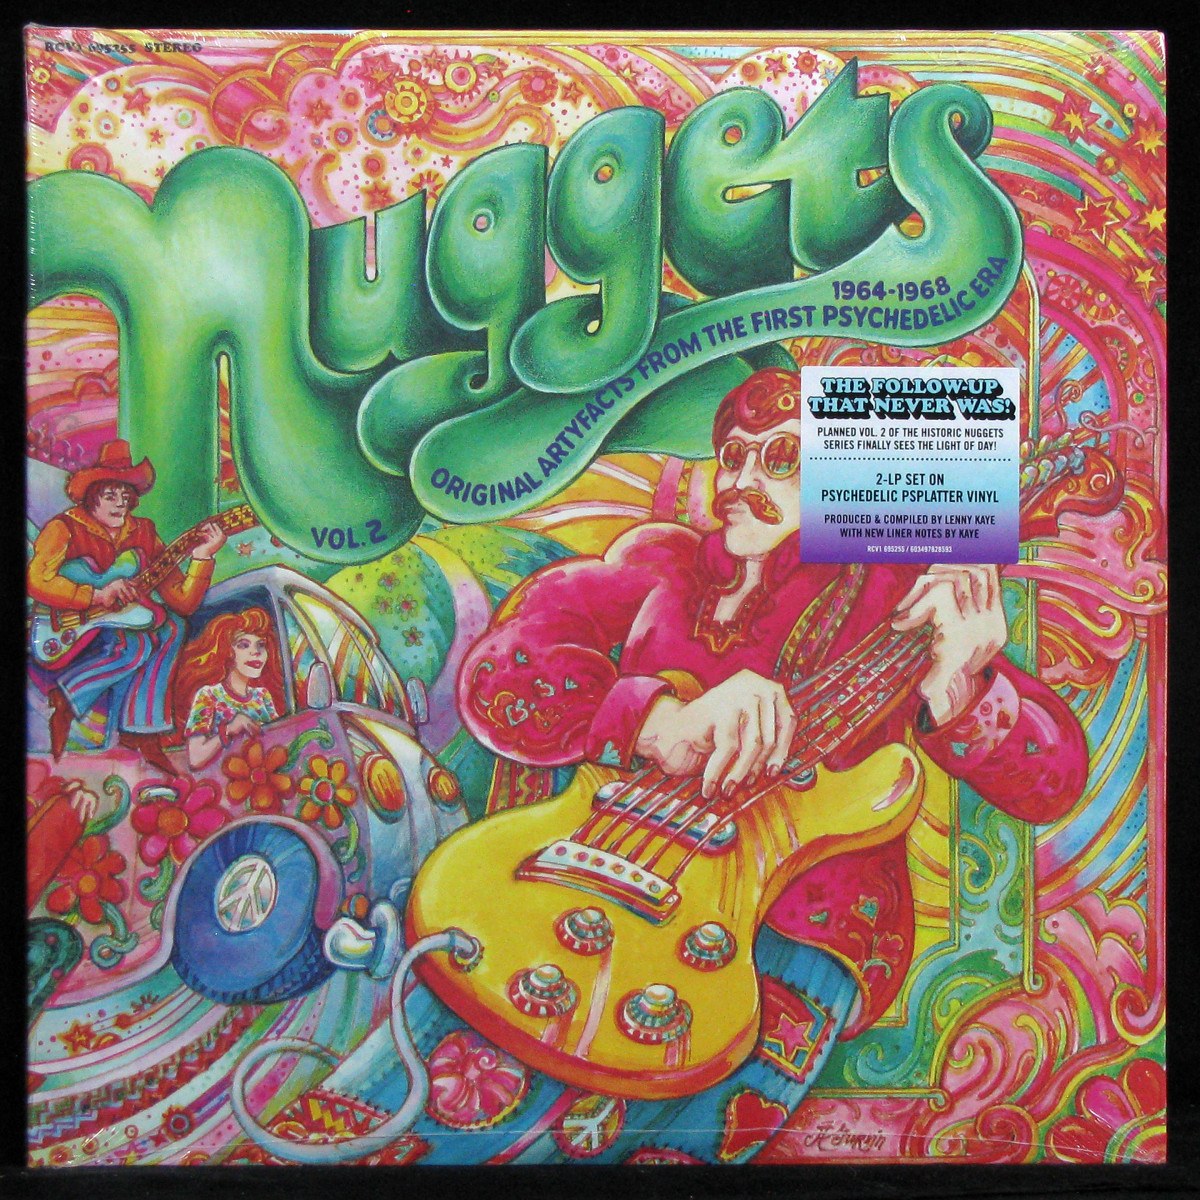 LP V/A — Nuggets: Vol. 2 Original Artyfacts From The First Psychedelic Era 1964-1968 (2LP, coloured vinyl) фото